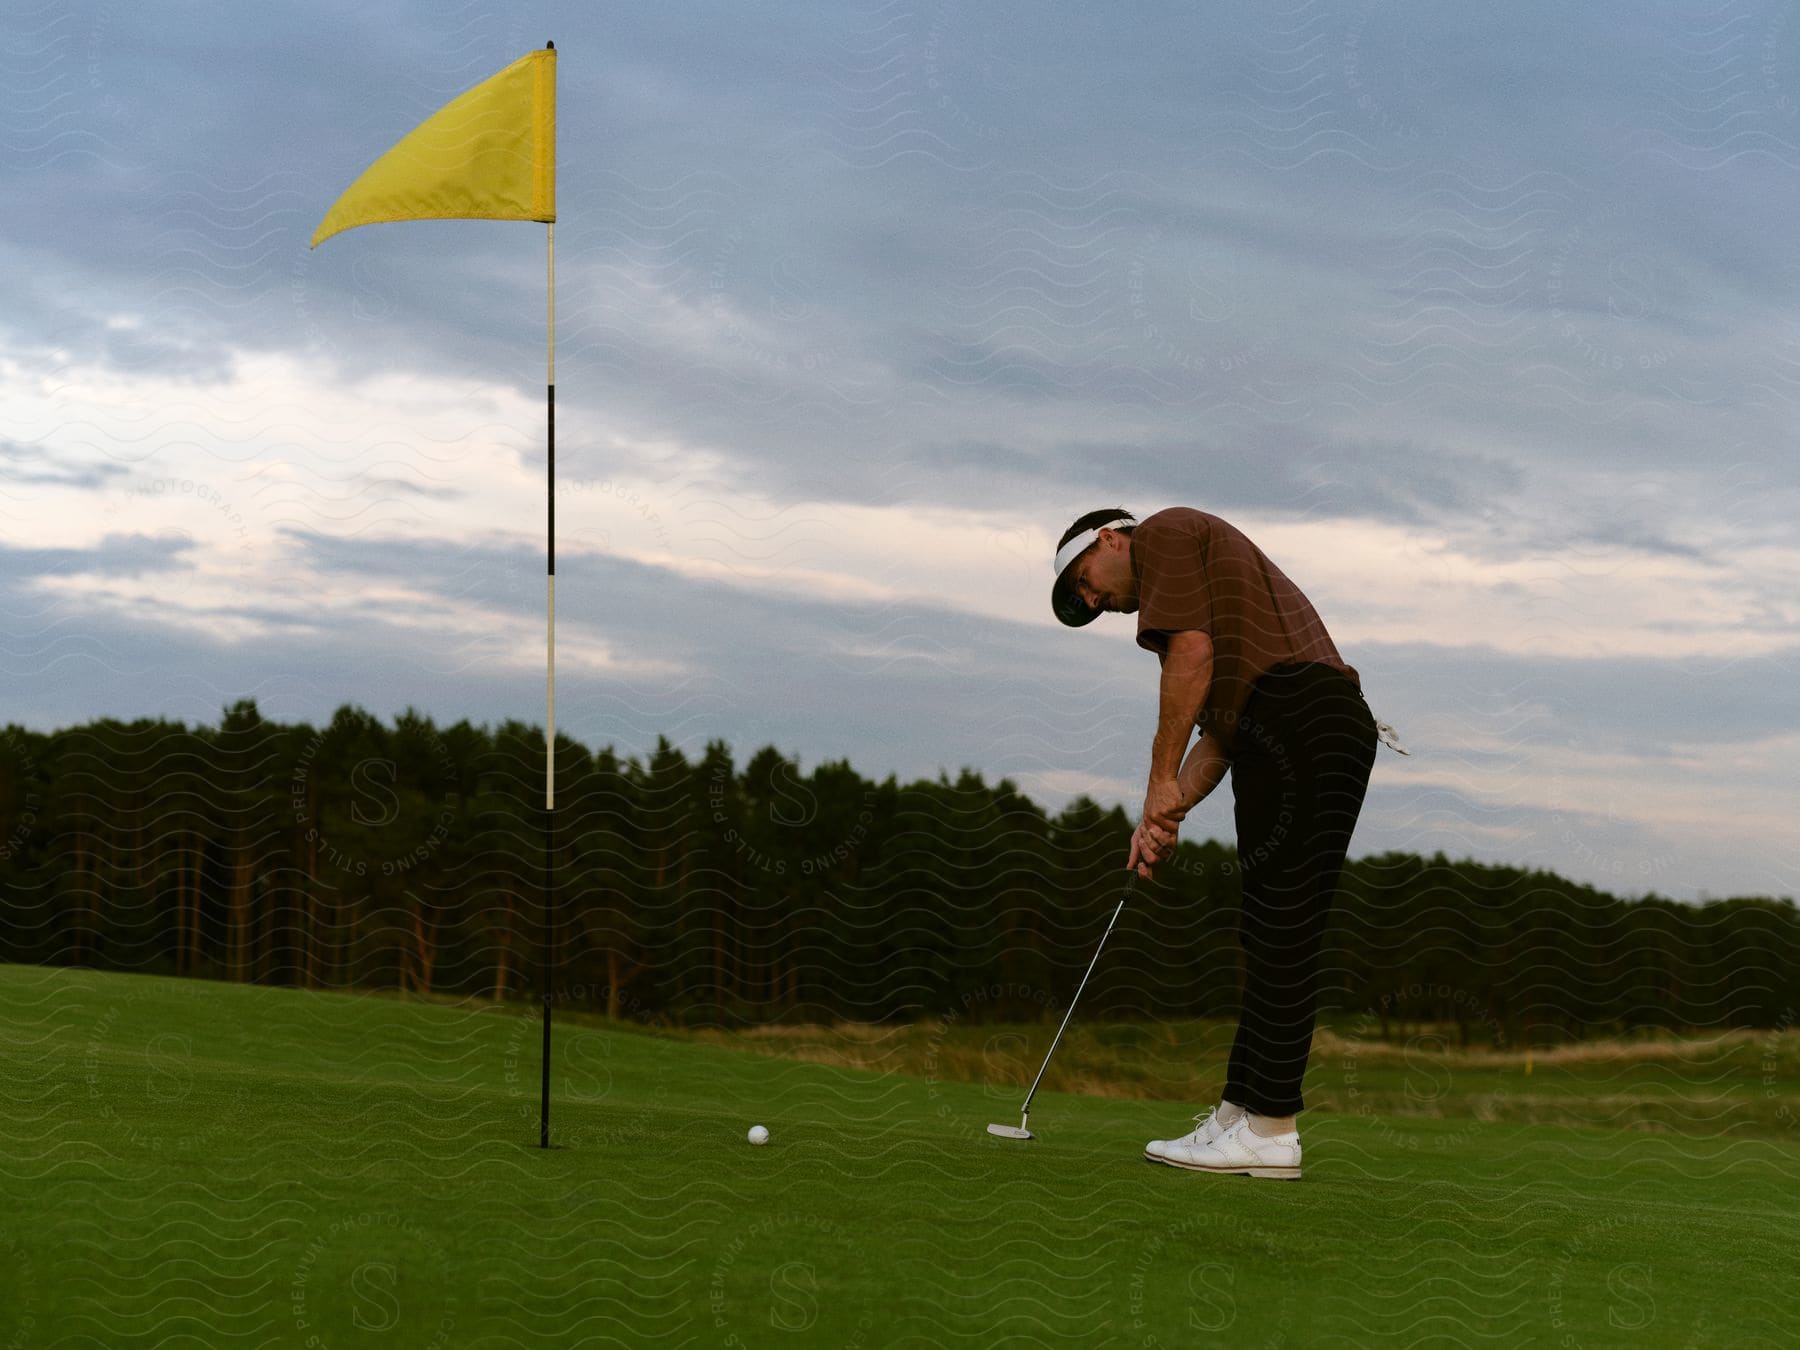 A golfer putts his ball towards the flagpole in the hole on a cloudy day, with a forest in the background.